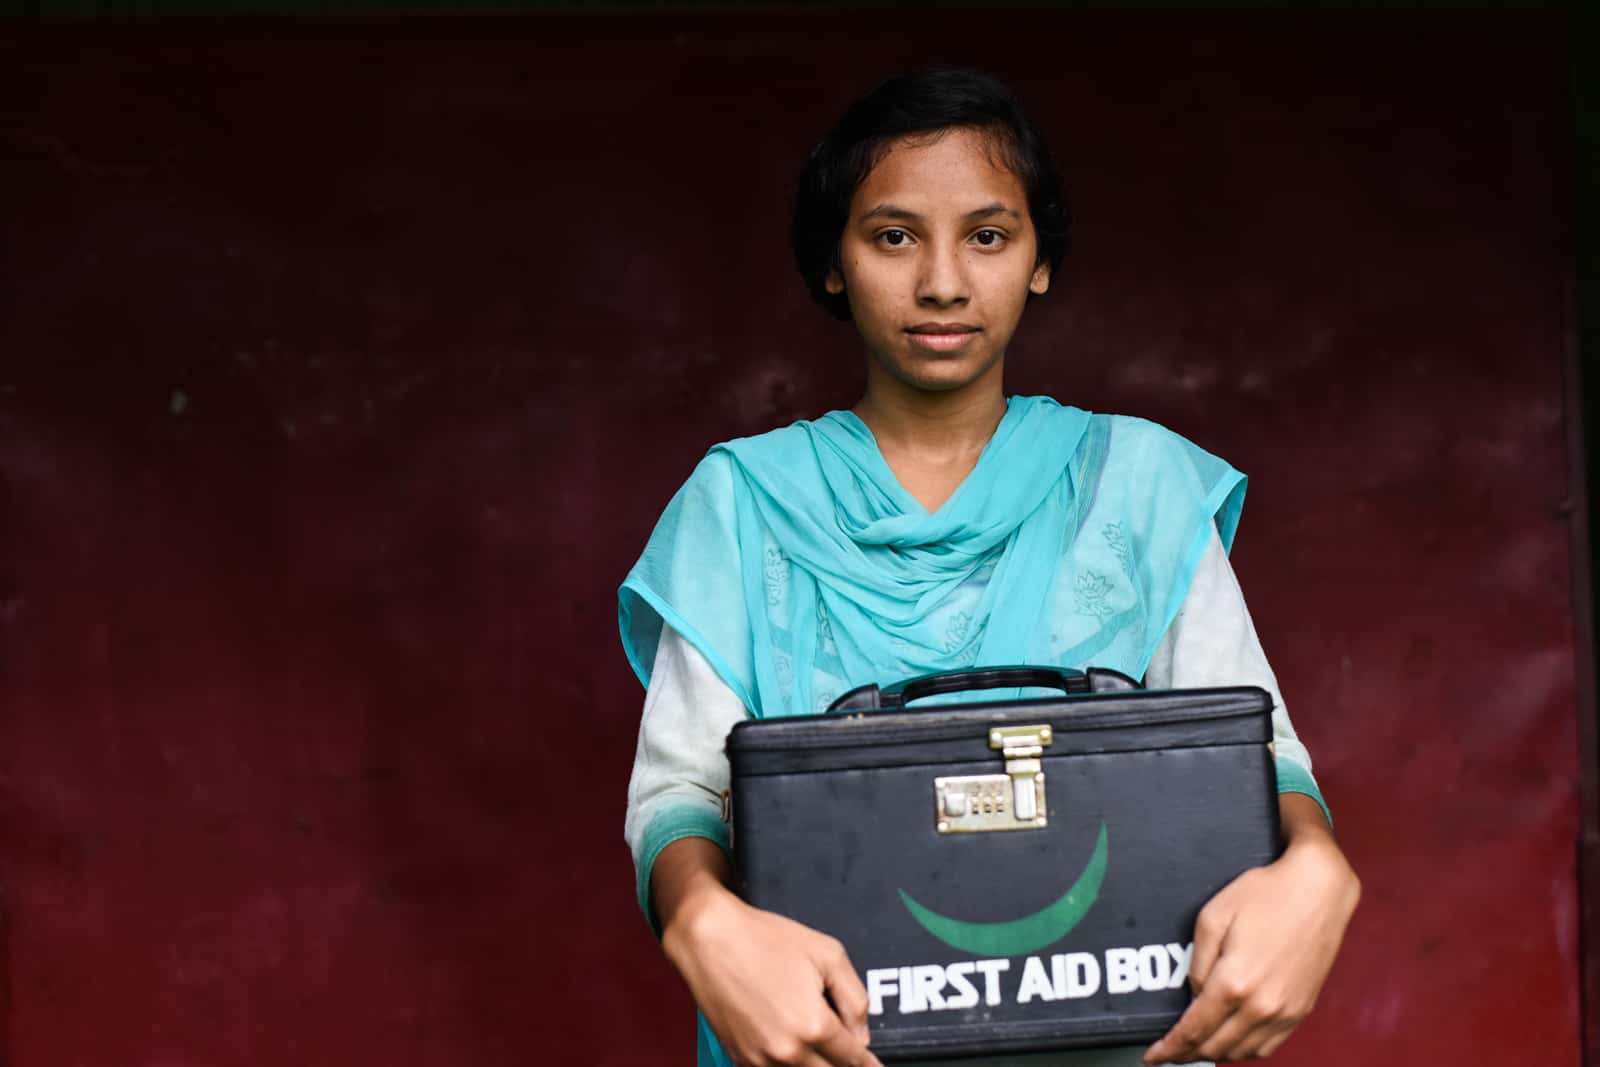 A teenage girl holds a medical kit